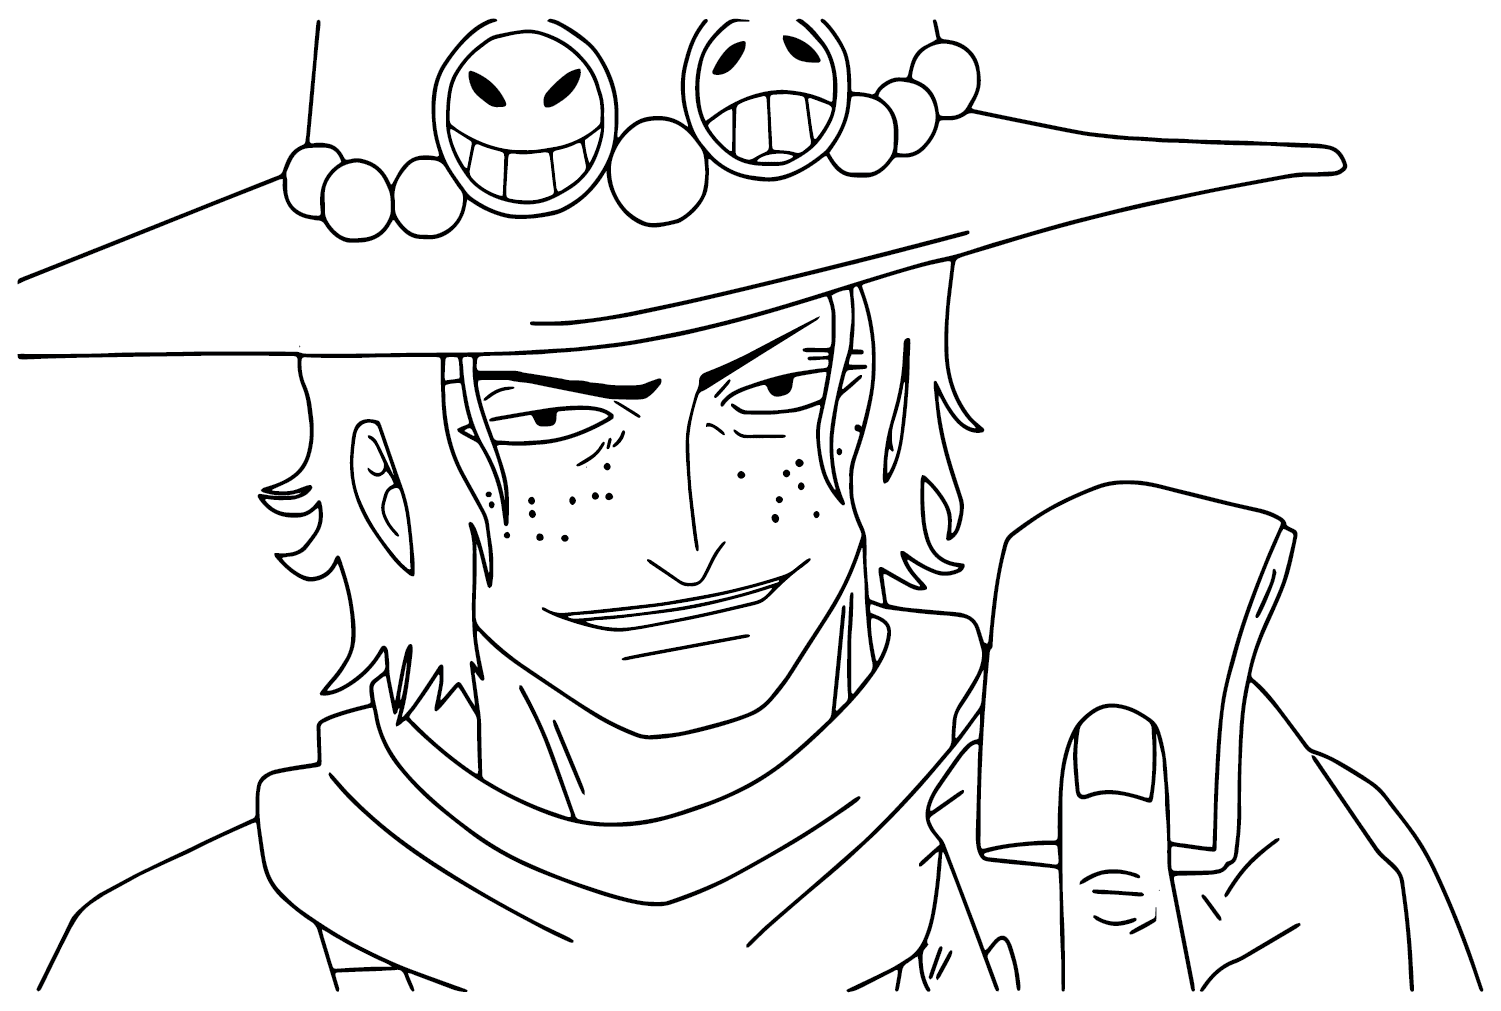 Portgas D. Ace Coloring Pages to Printable from Portgas D. Ace